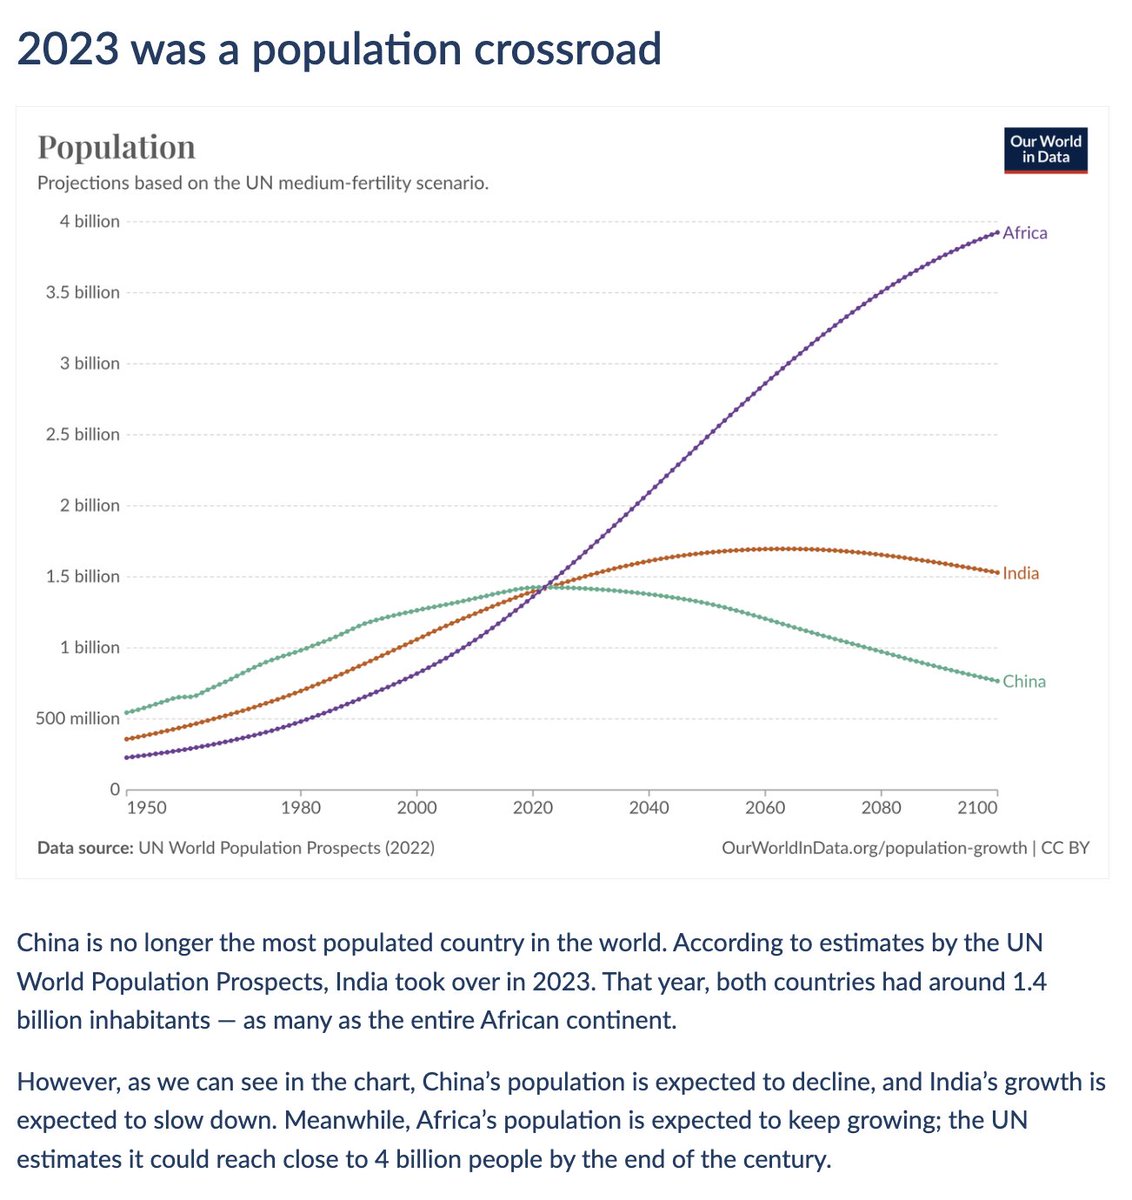 2023 was a population crossroad Today's data insight is by Pablo Rosado. You can find all of our Data Insights on their dedicated feed: ourworldindata.org/data-insights